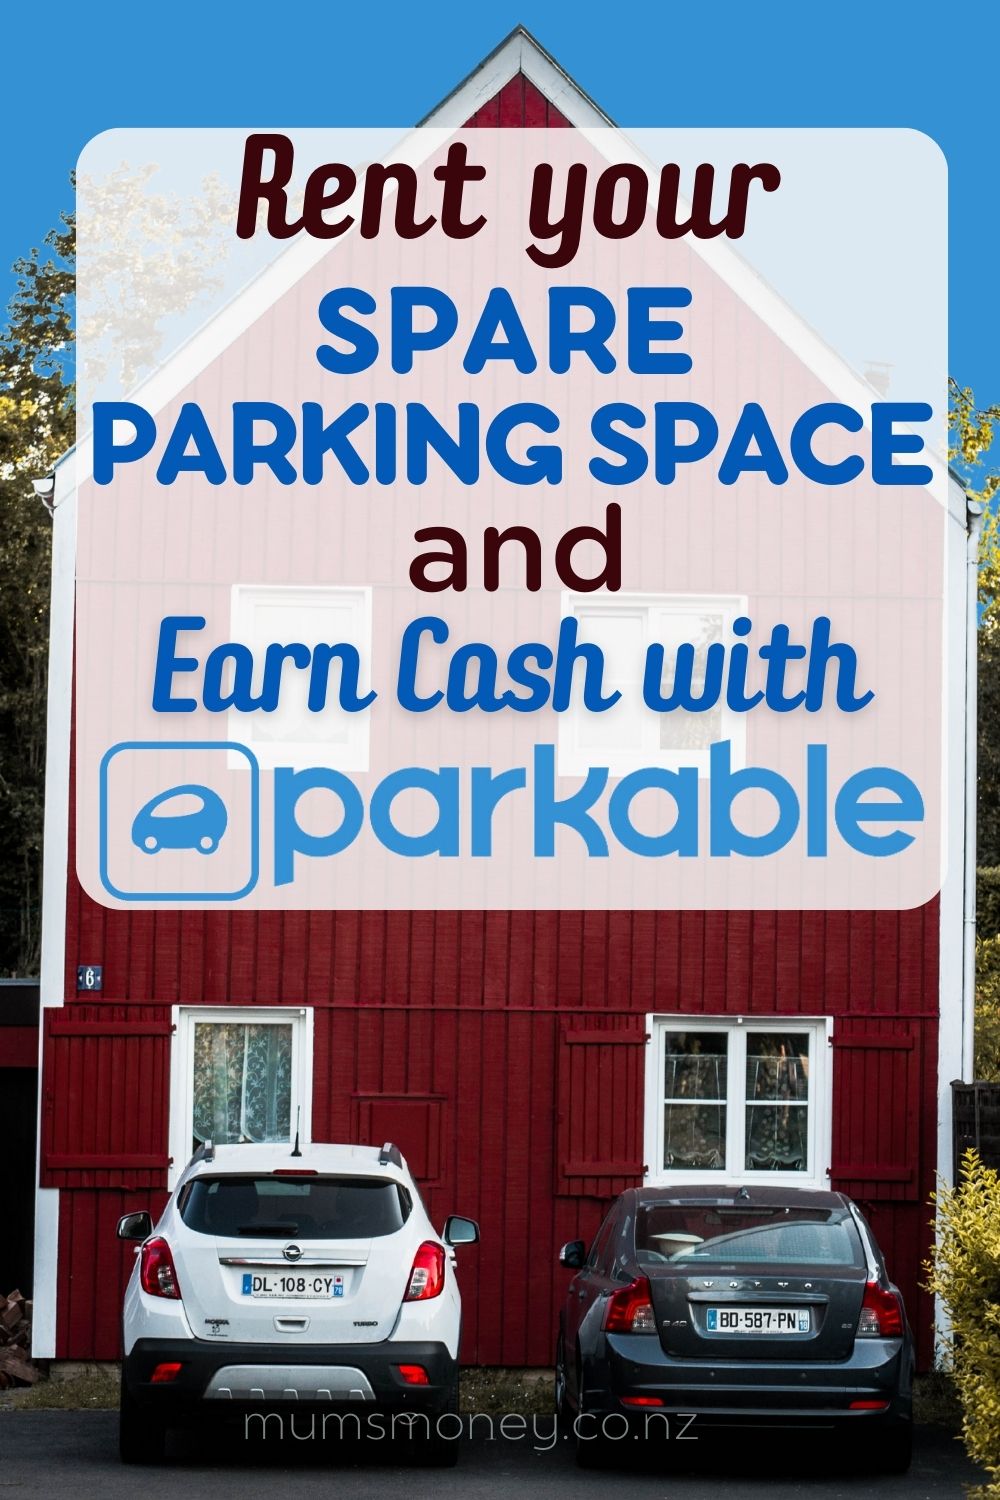 Rent Your Spare Parking Space and Earn Cash with Parkable